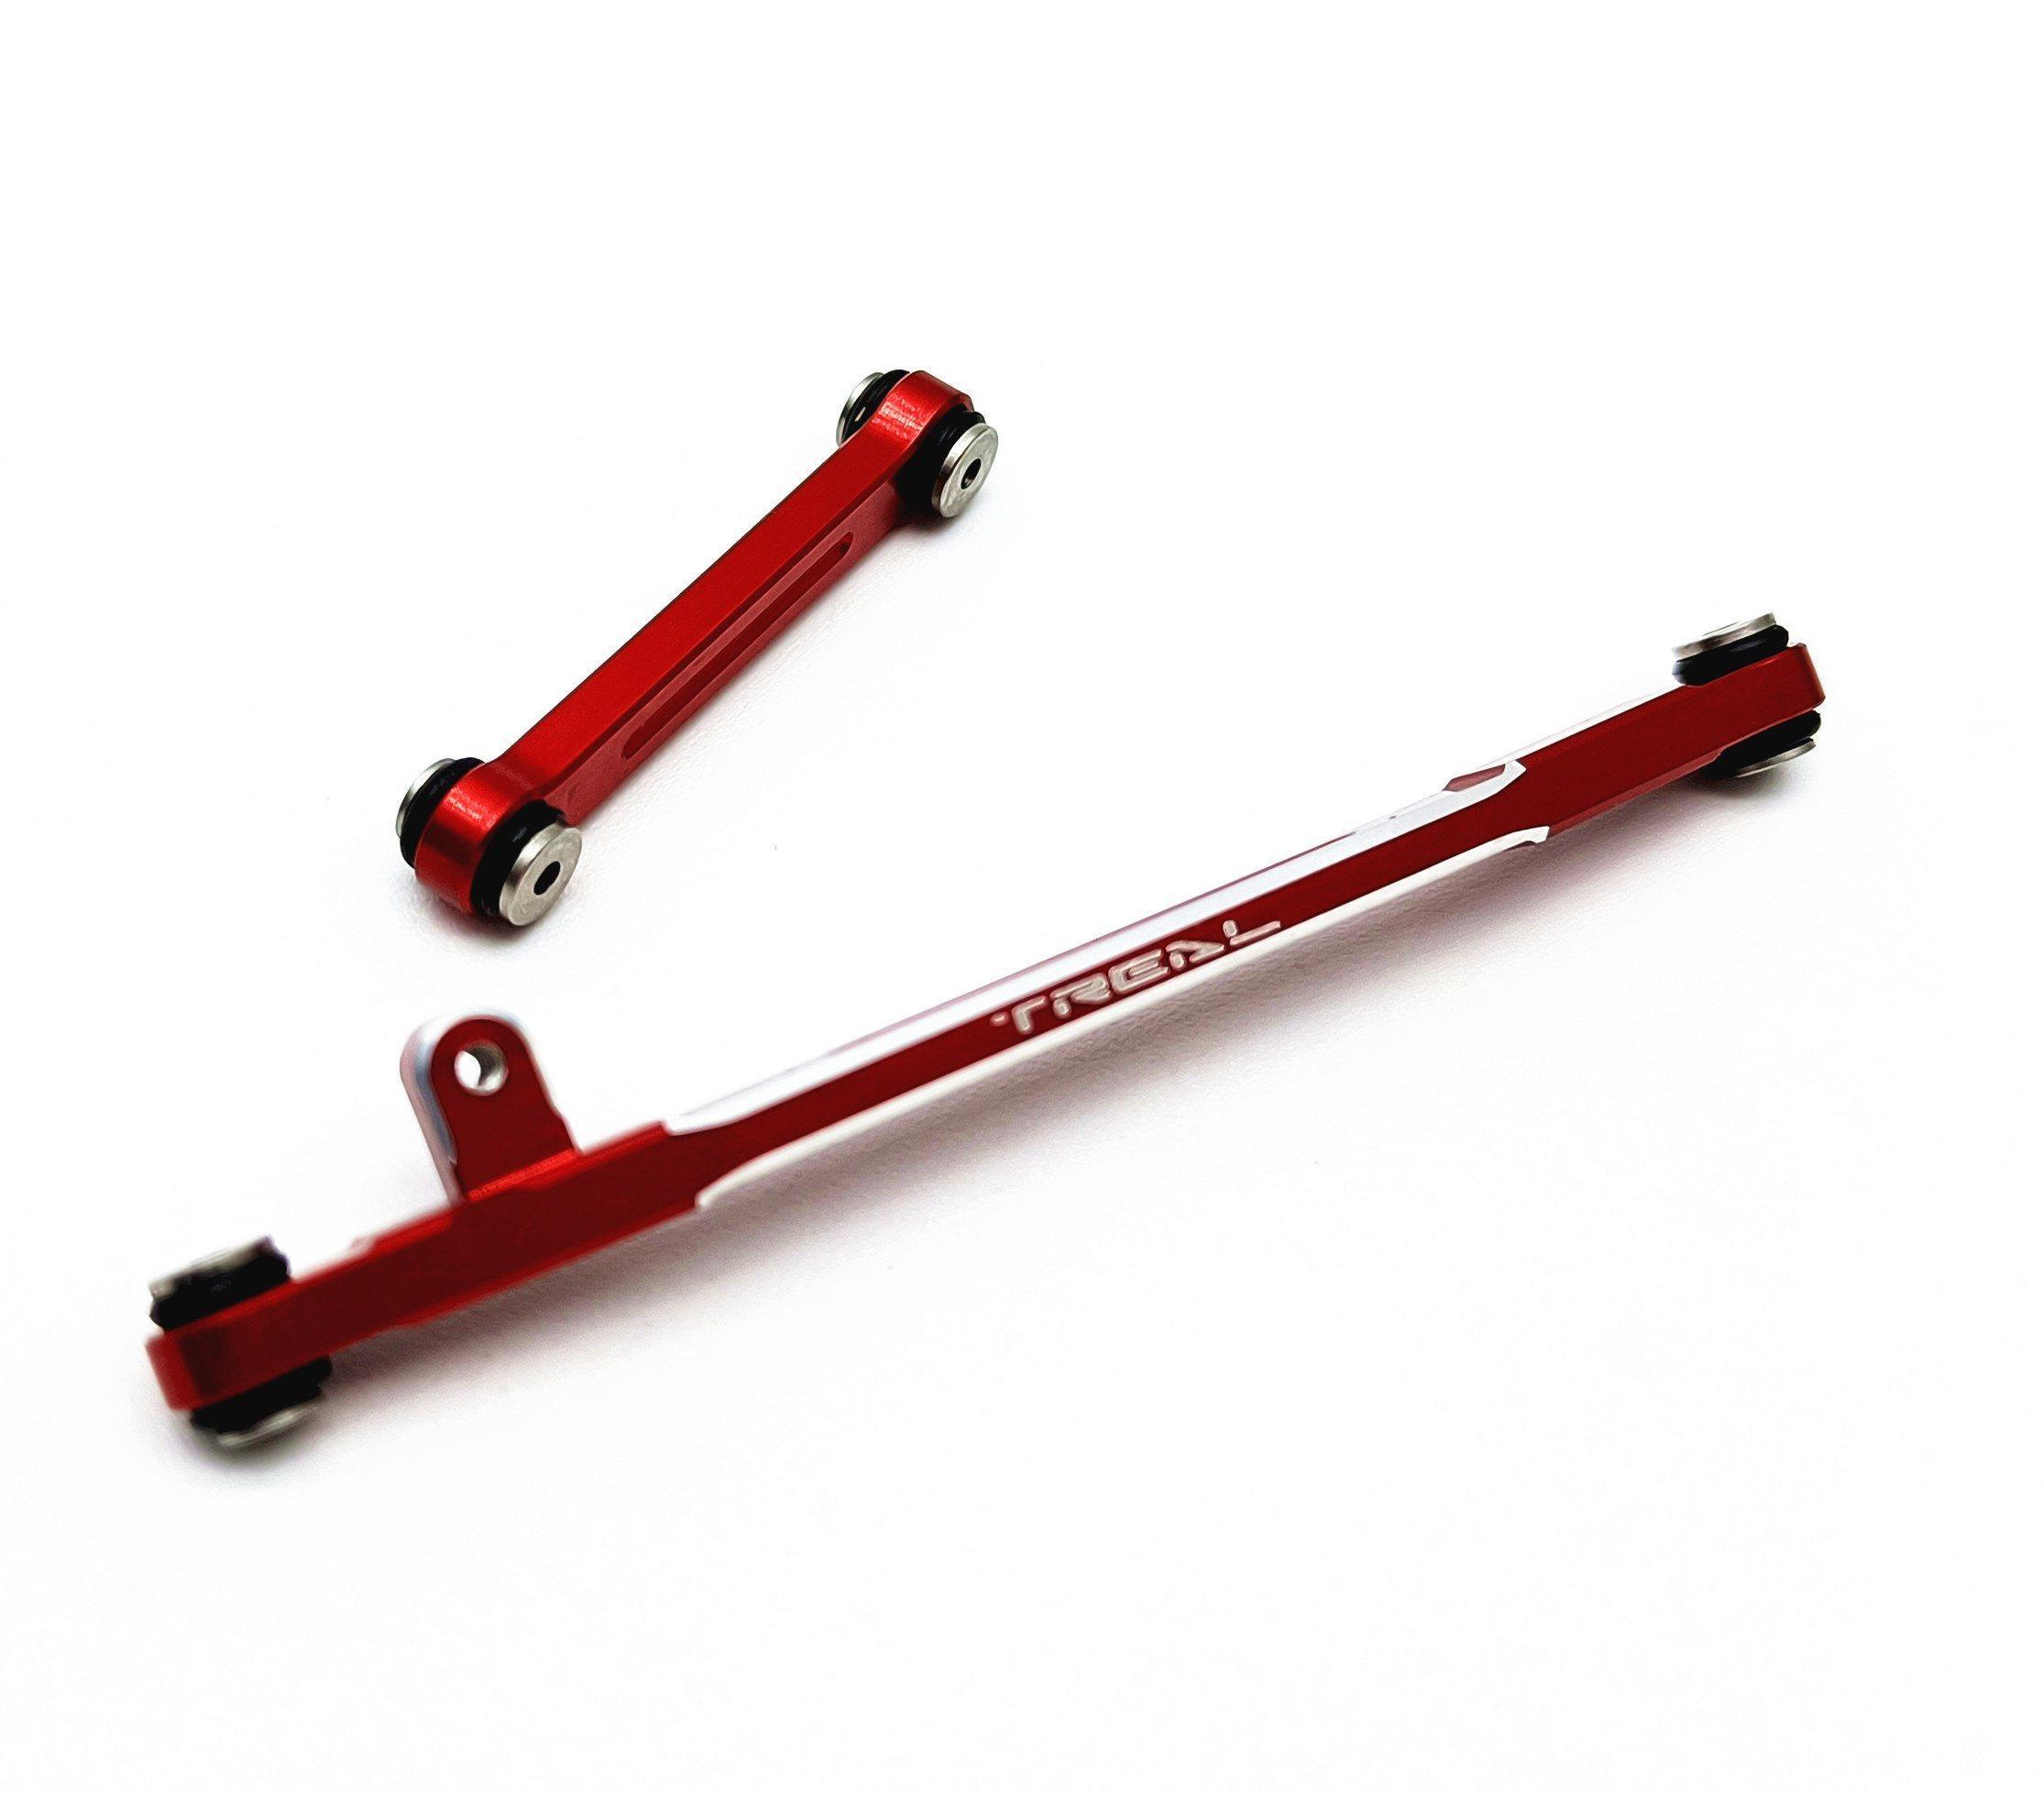 Treal Aluminum 7075 Steering Links Set for Axial SCX24 1/24 Scale-V2 (Red) ...